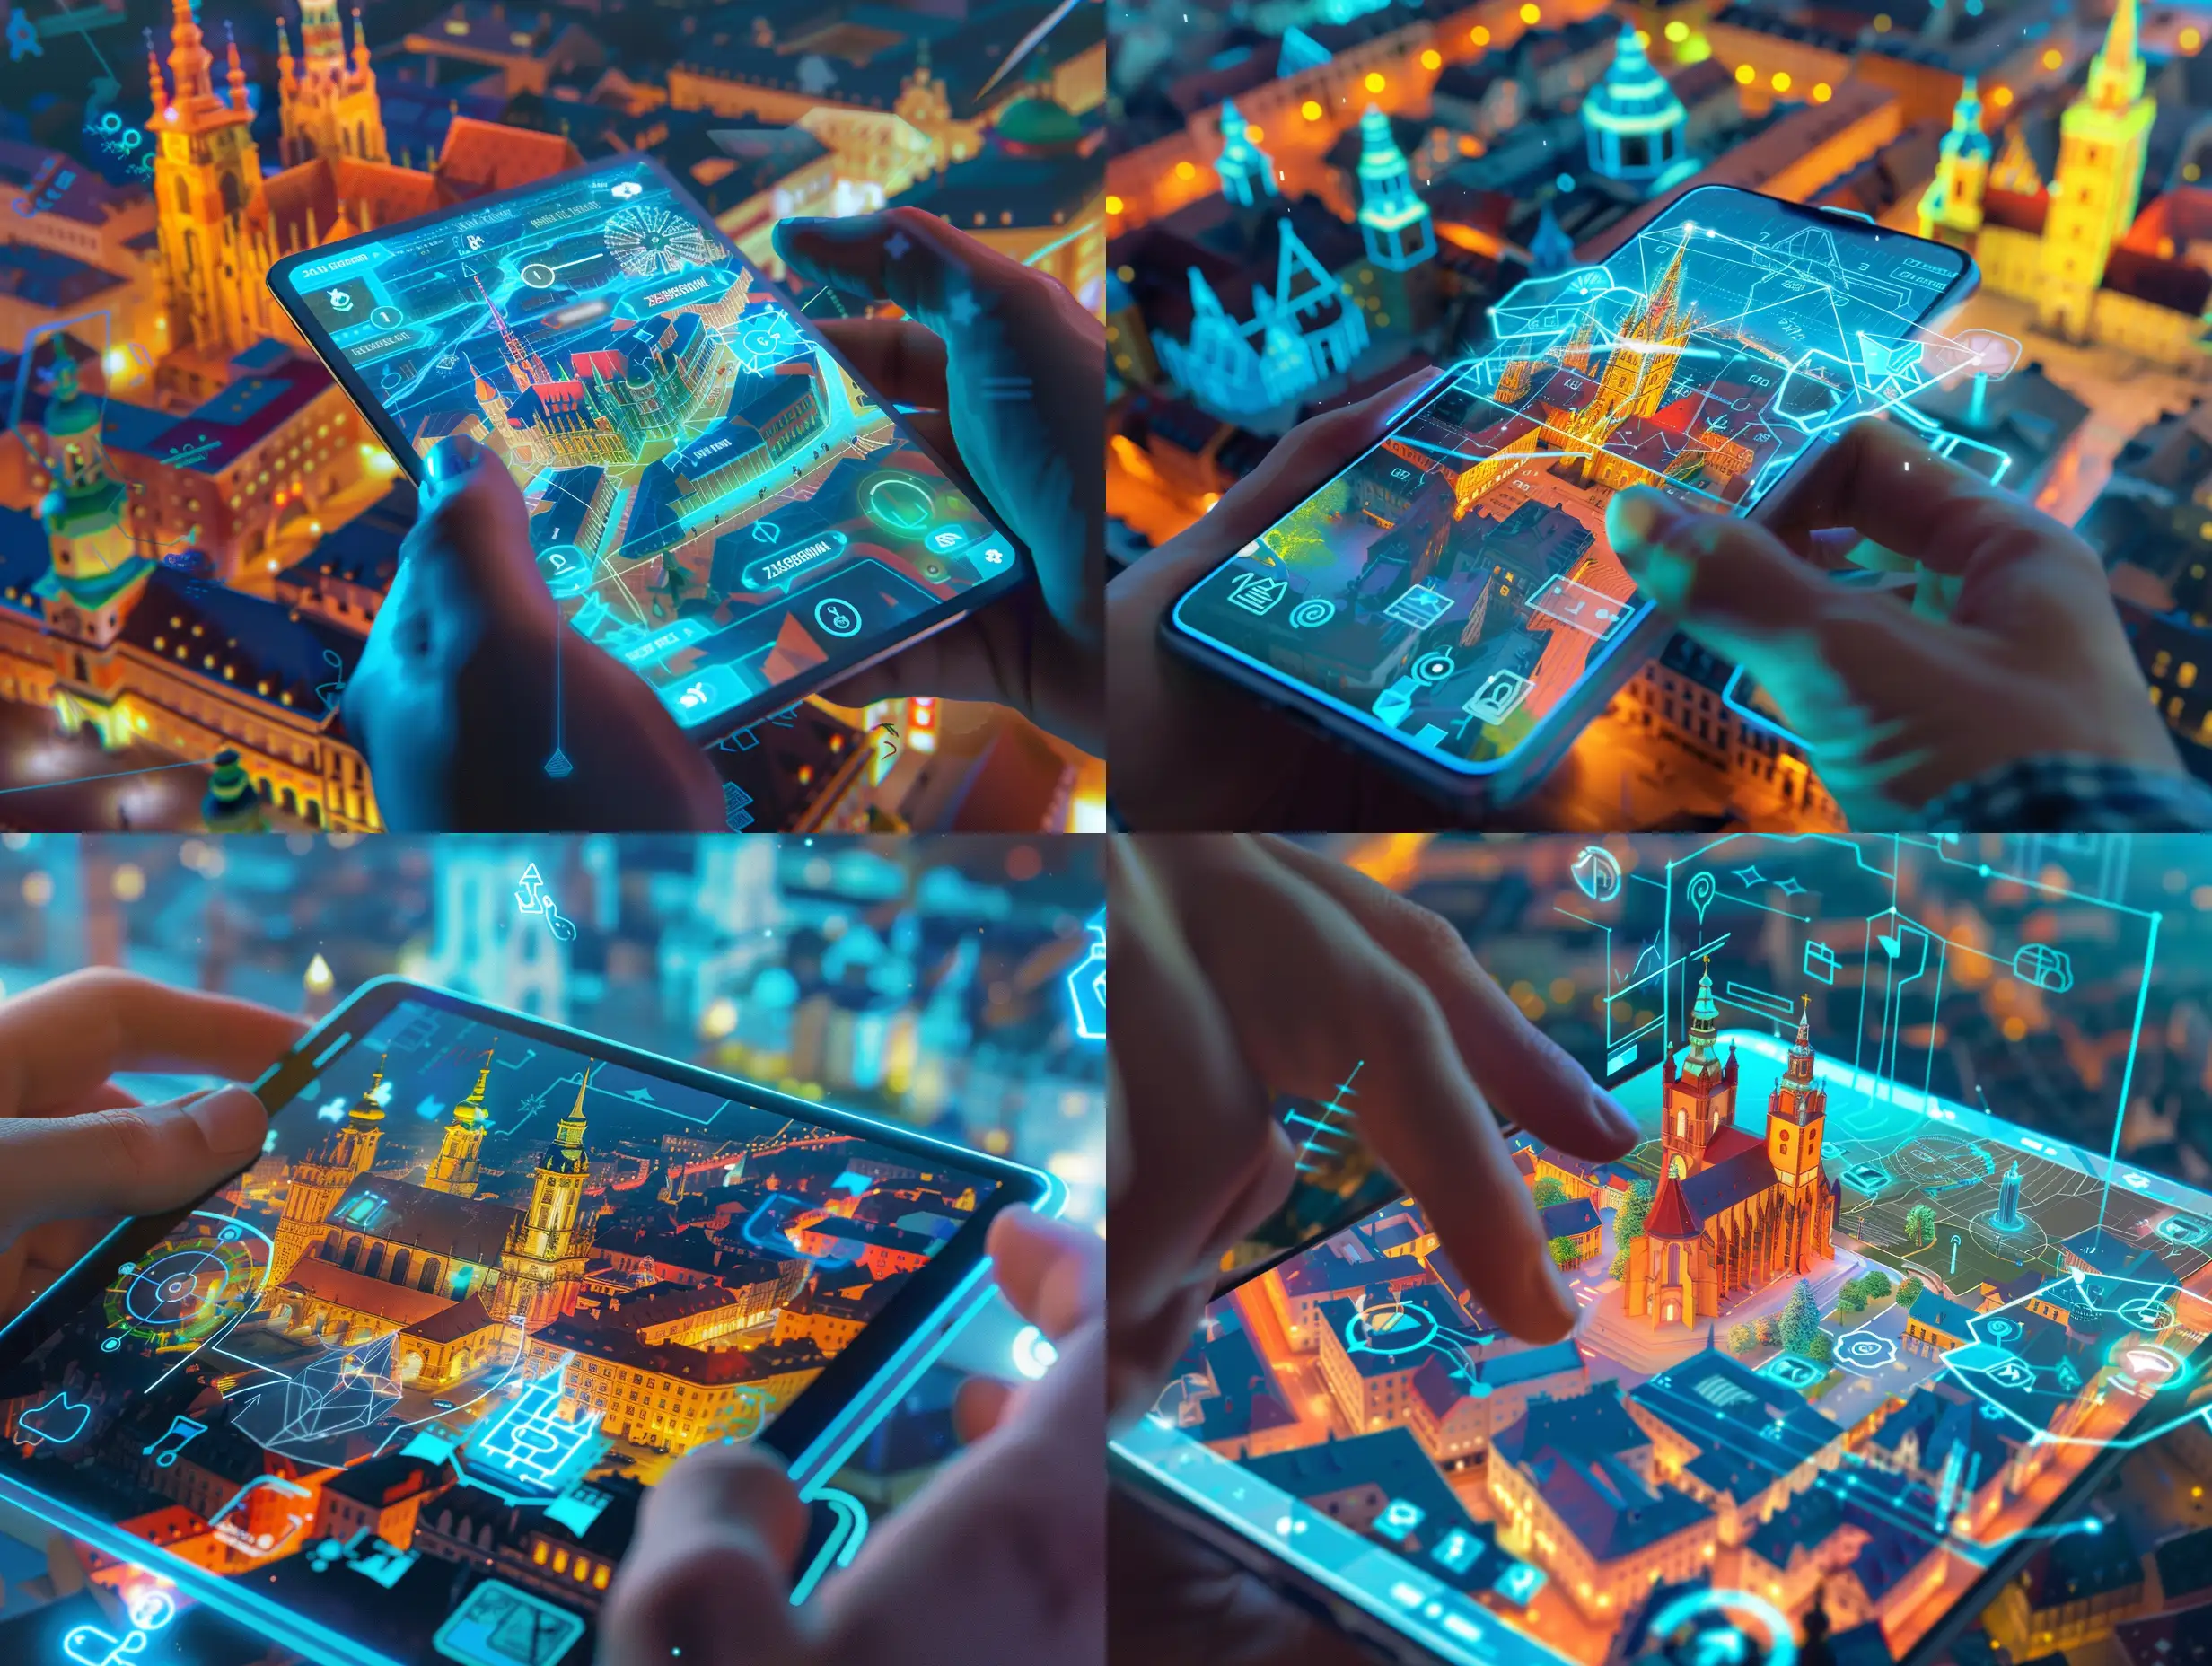 Modern-City-Game-Zakodowany-Wrocaw-with-Centennial-Hall-and-Interactive-Technology